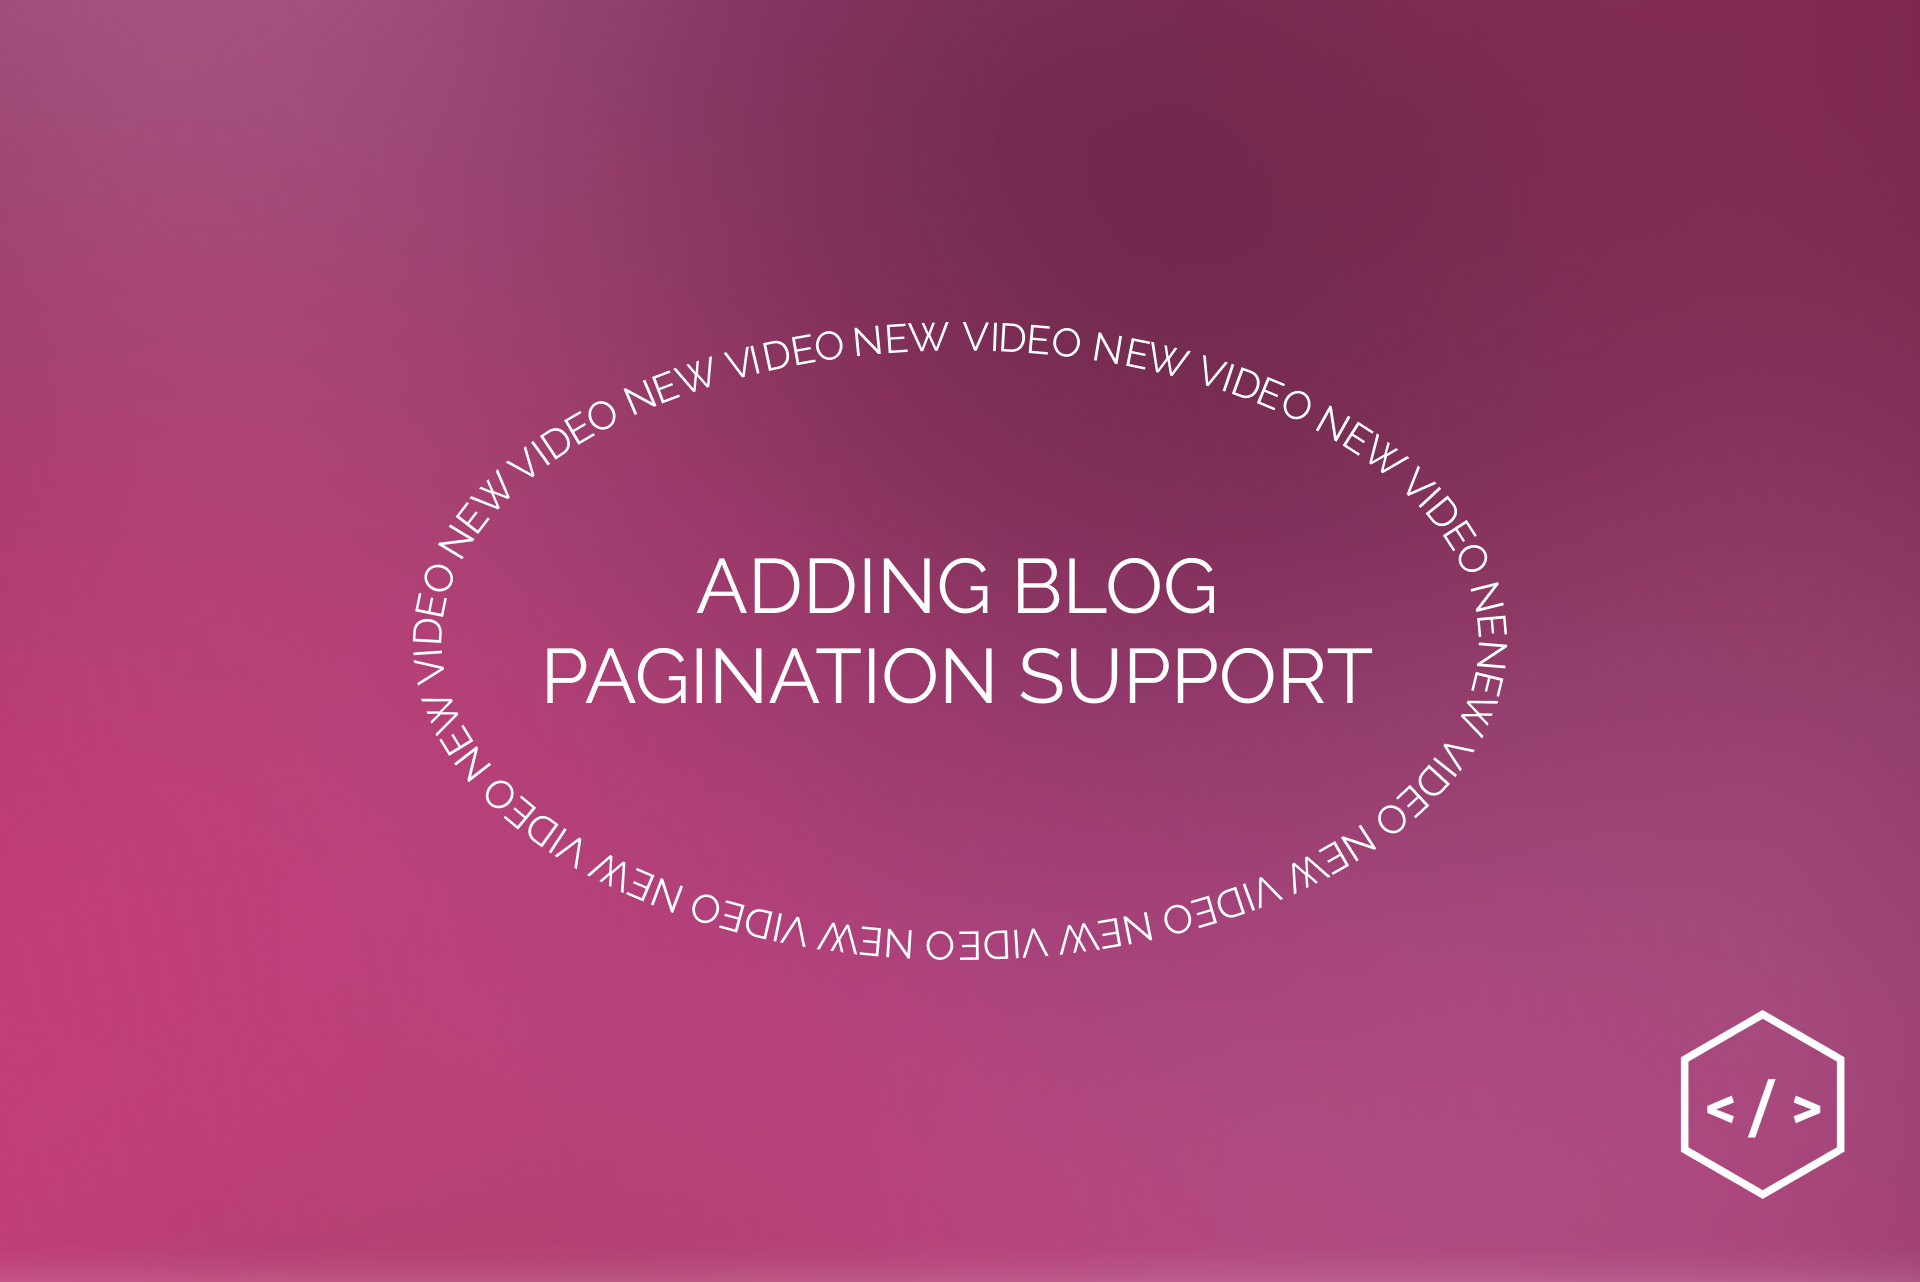 How to add Blog Pagination Support?